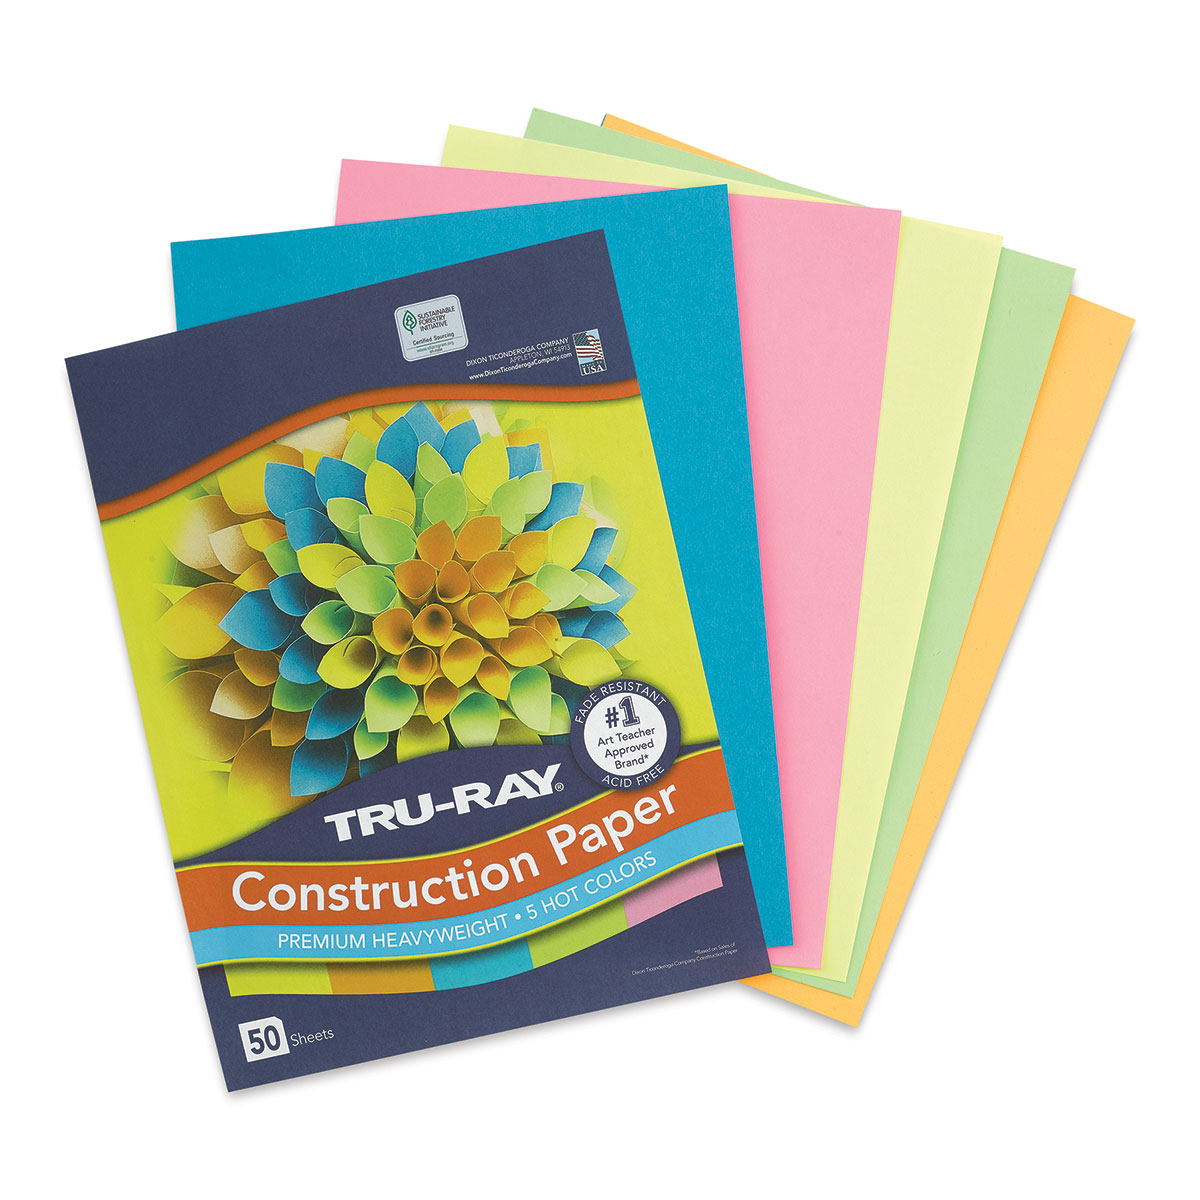 Tru-Ray Construction Paper - Construction, Art Project, PACP6686, PAC P6686  - Office Supply Hut